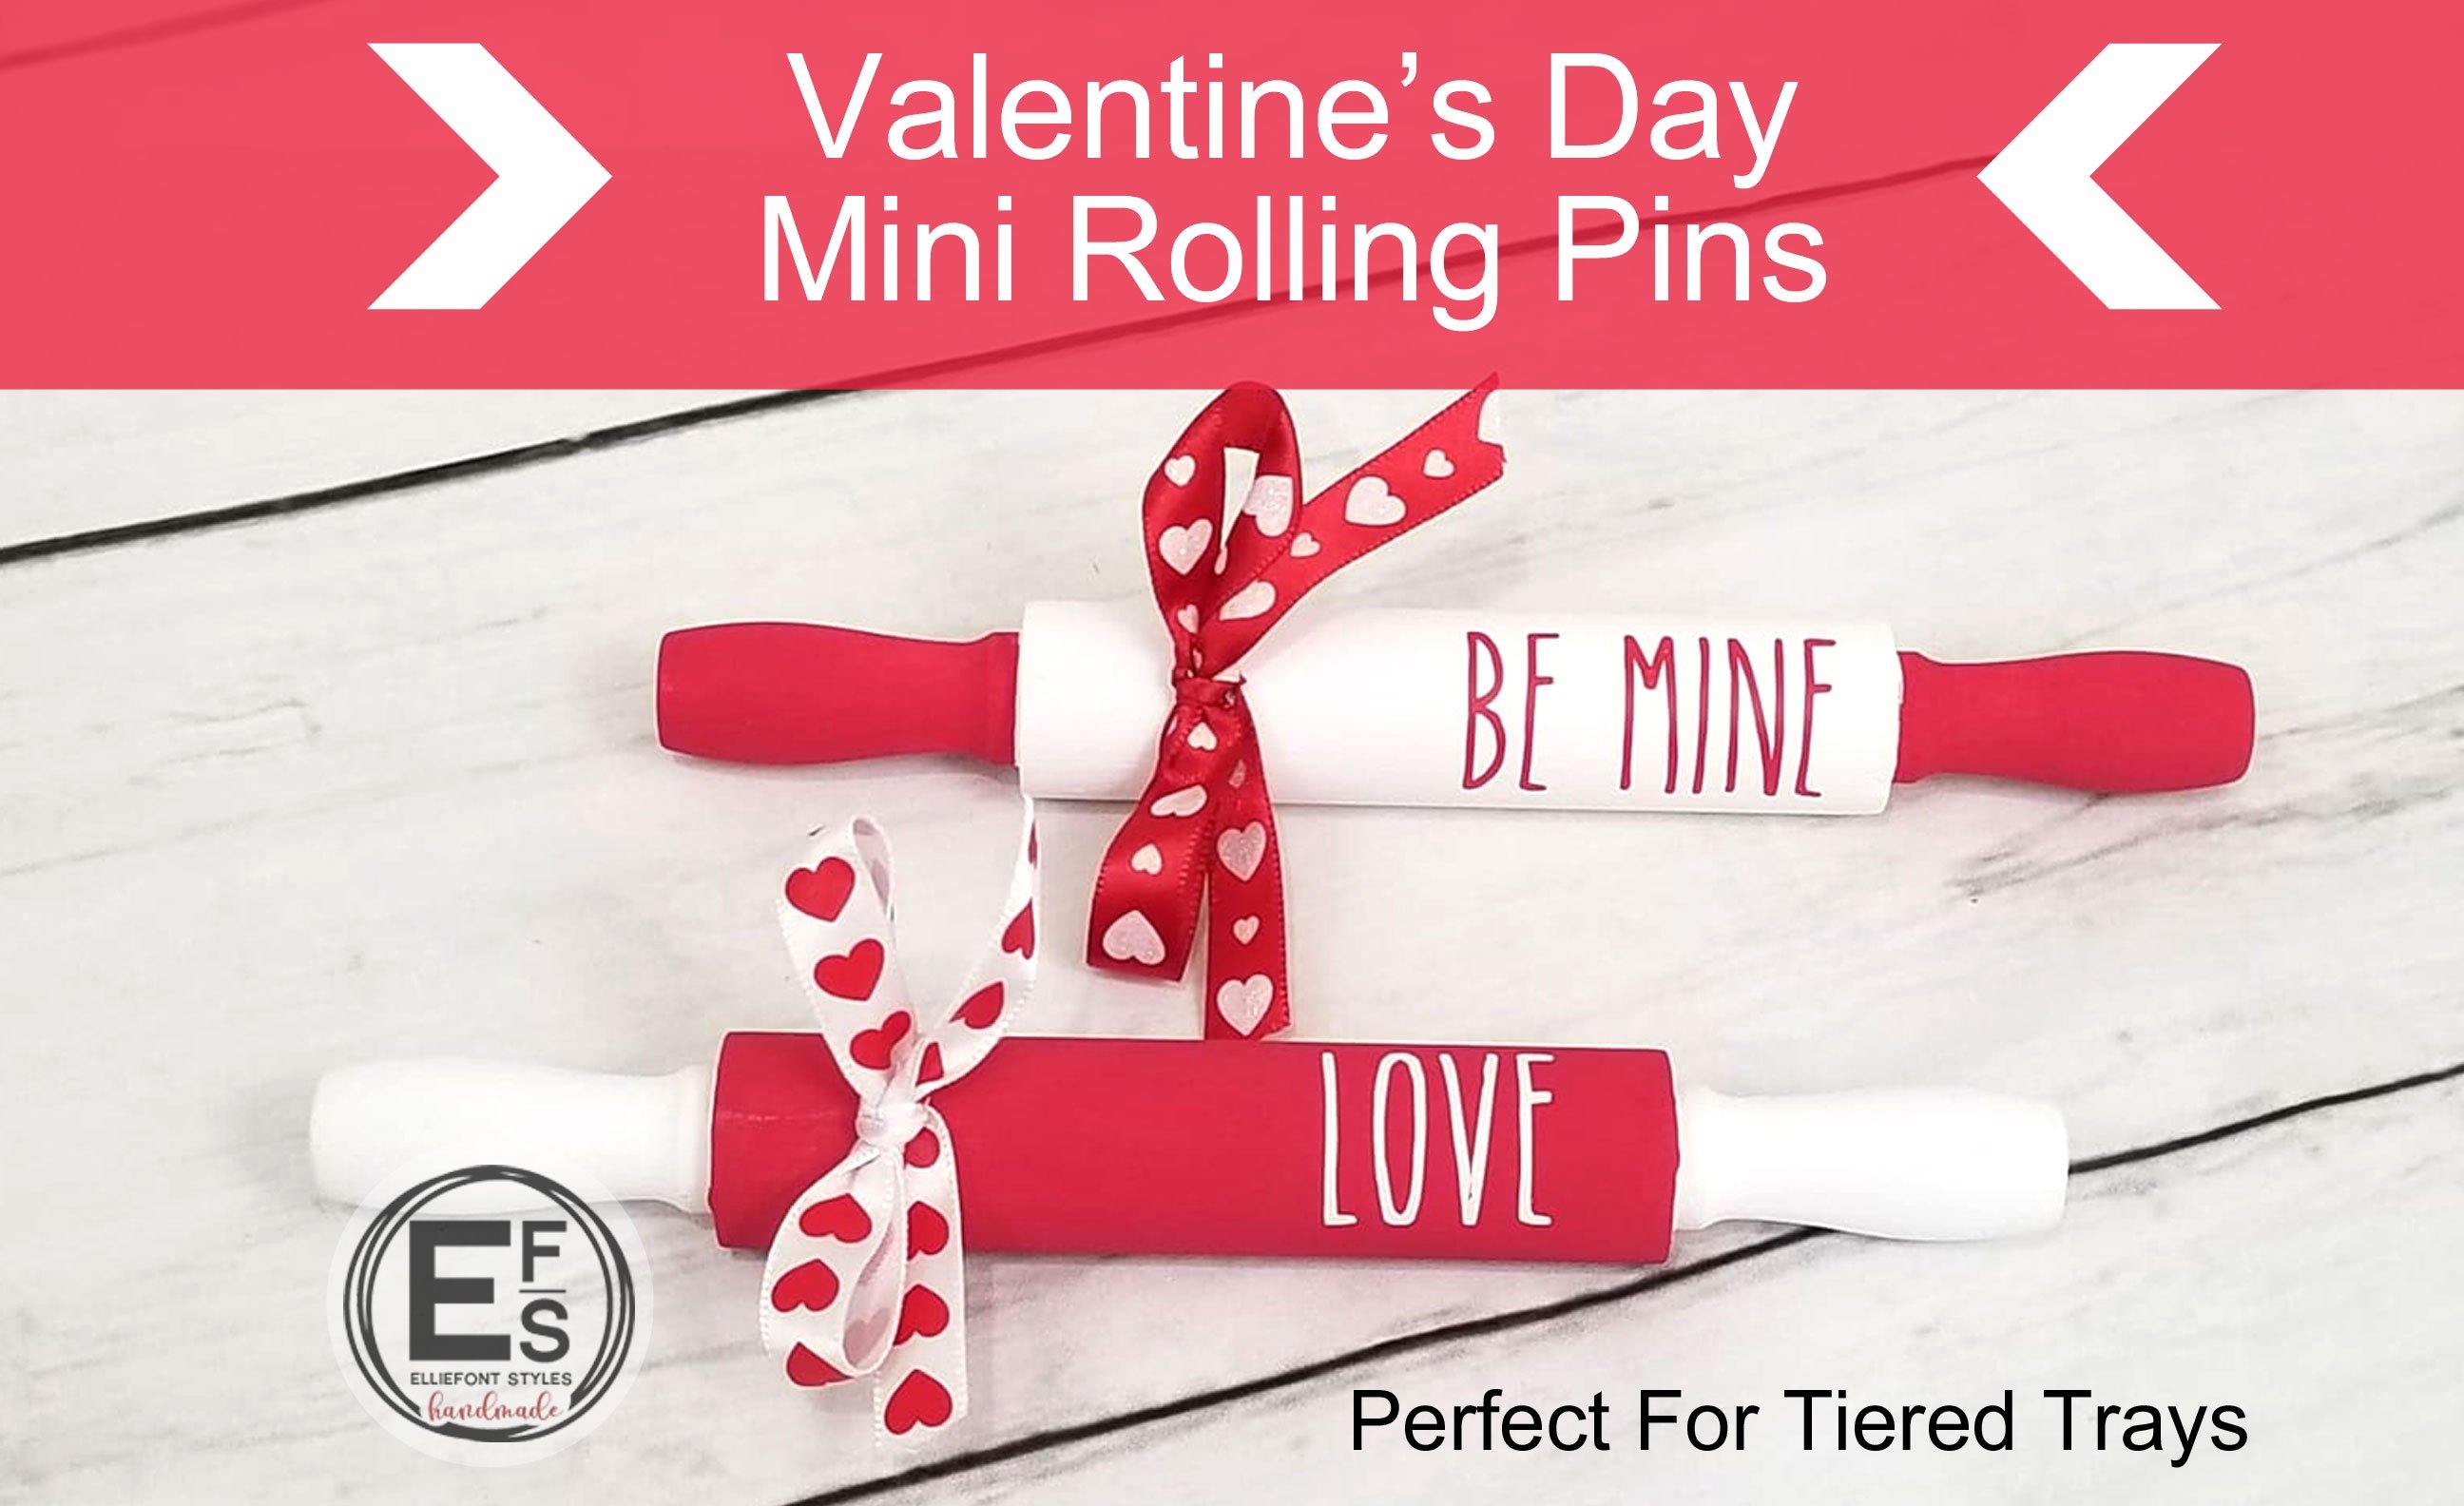 Tiered Tray Mini Rolling Pins - Valentine's Day - Elliefont Styles